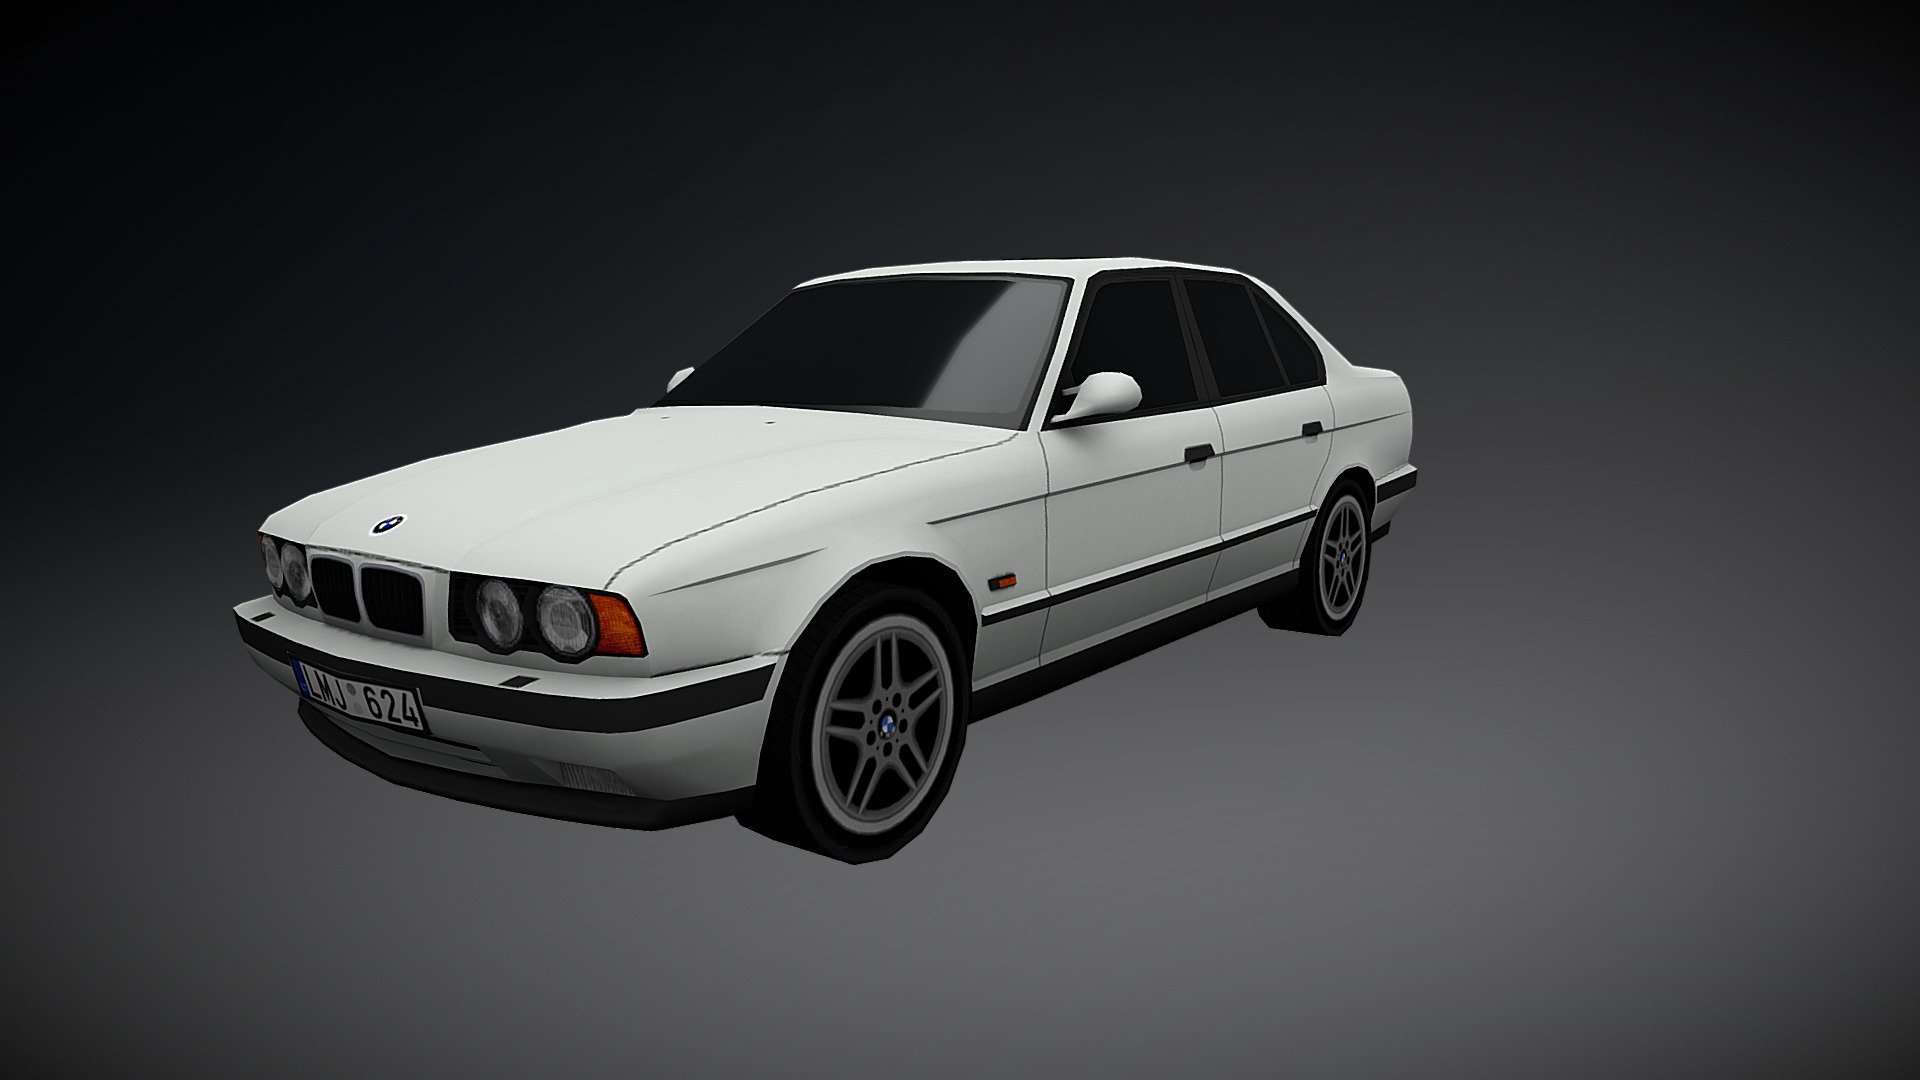 Updated v2    /2019-07-19

BMW E34;

Made for Cities: Skylines; 
2056 triangles; 
Lithuanian number plates 3d model